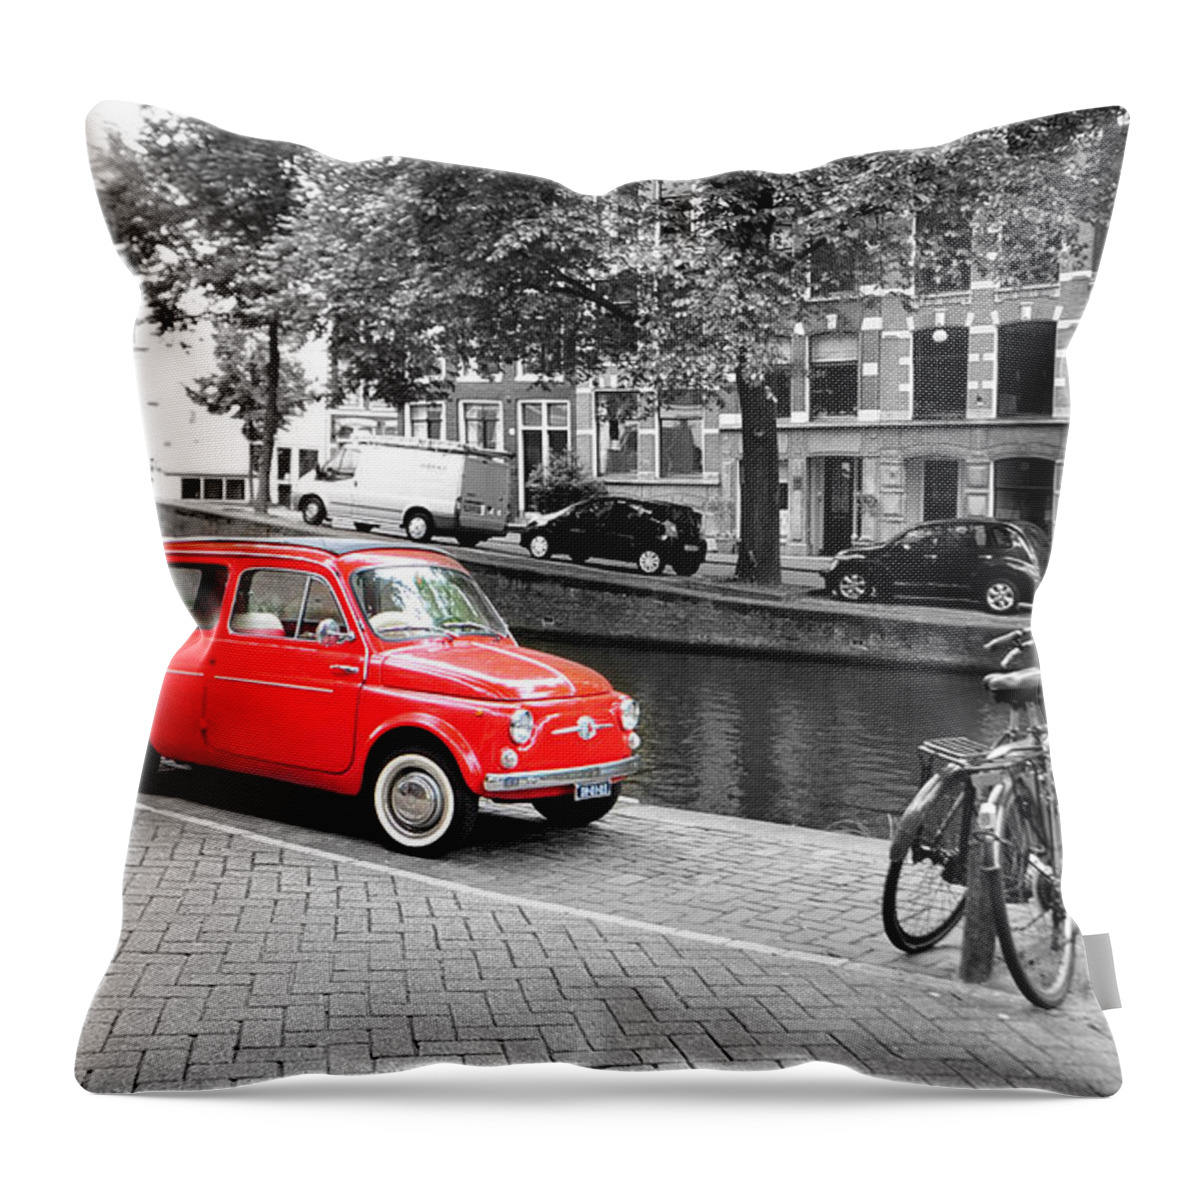 Red Throw Pillow featuring the photograph Red Cutie by Randi Grace Nilsberg